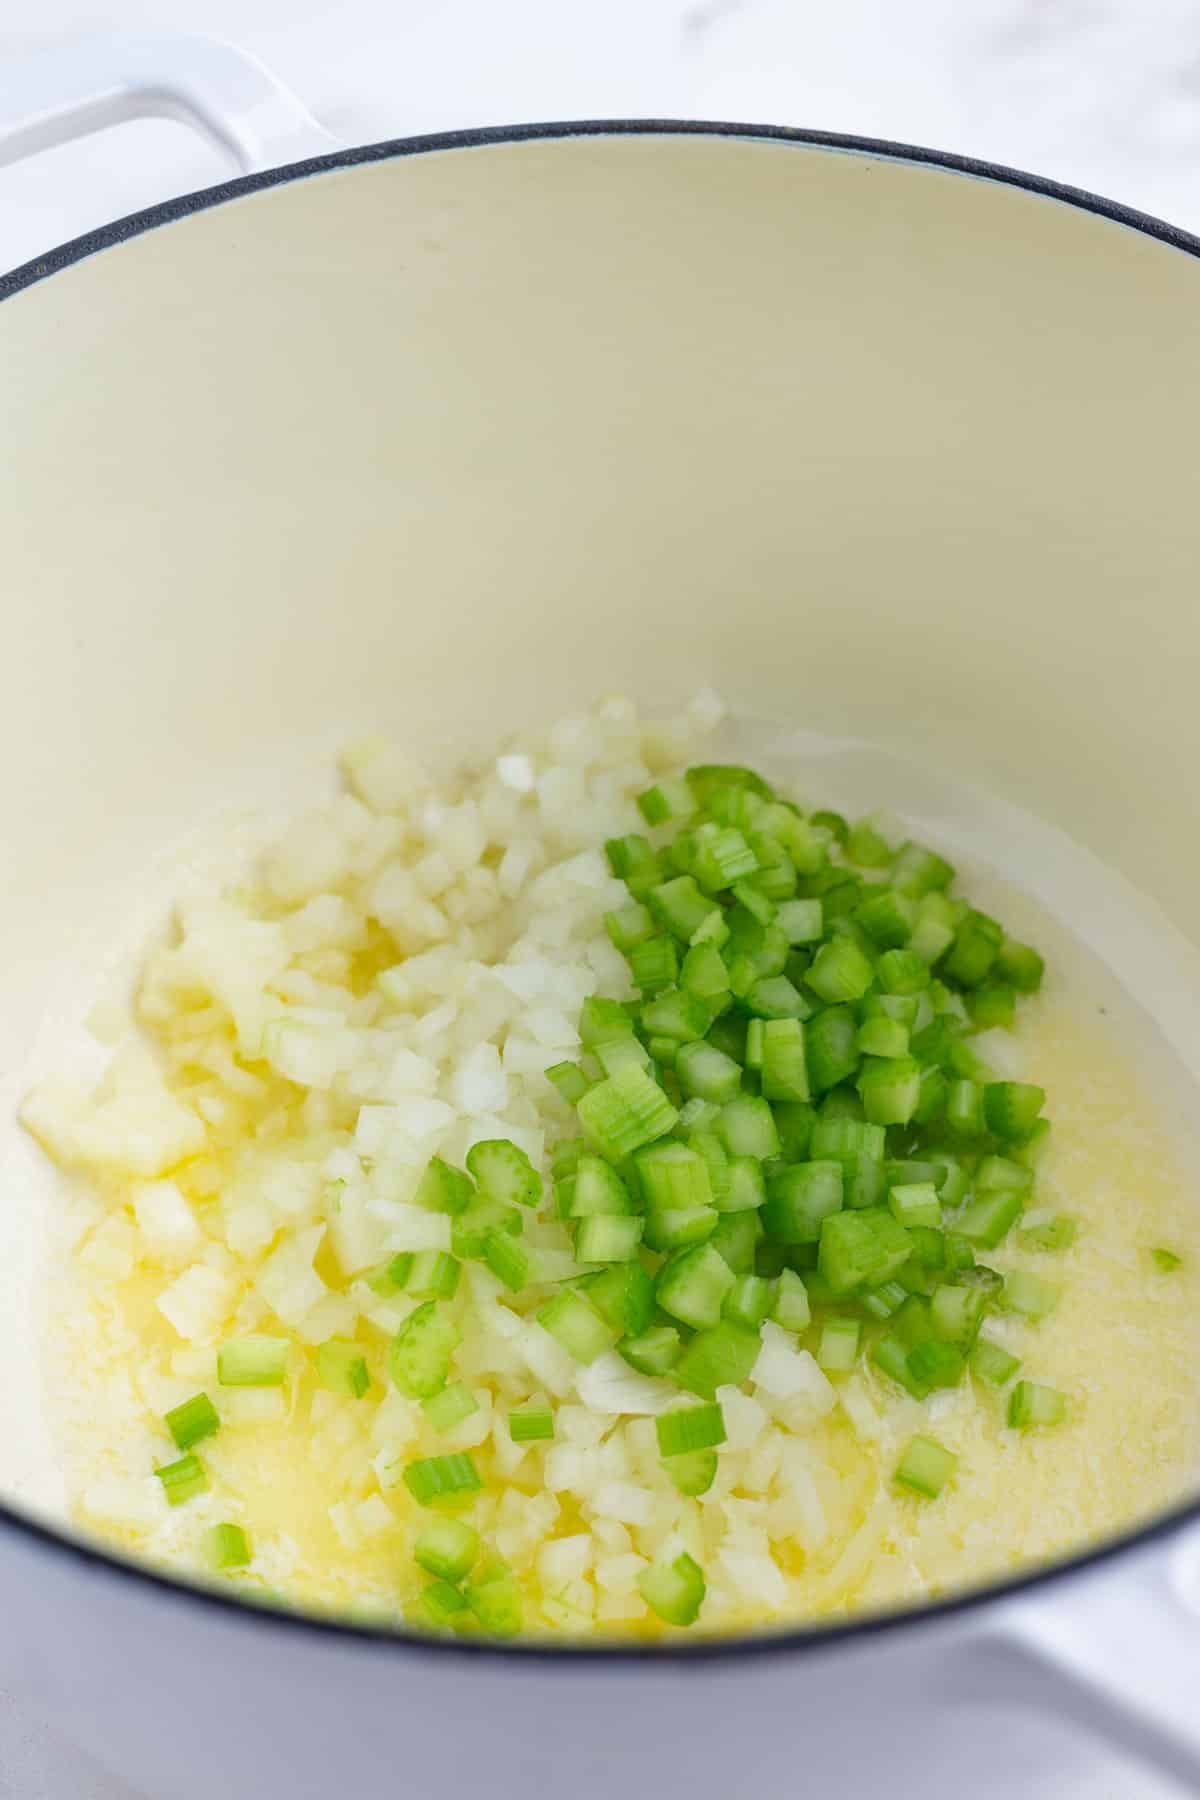 Celery, onion, and butter are heated in a pan.